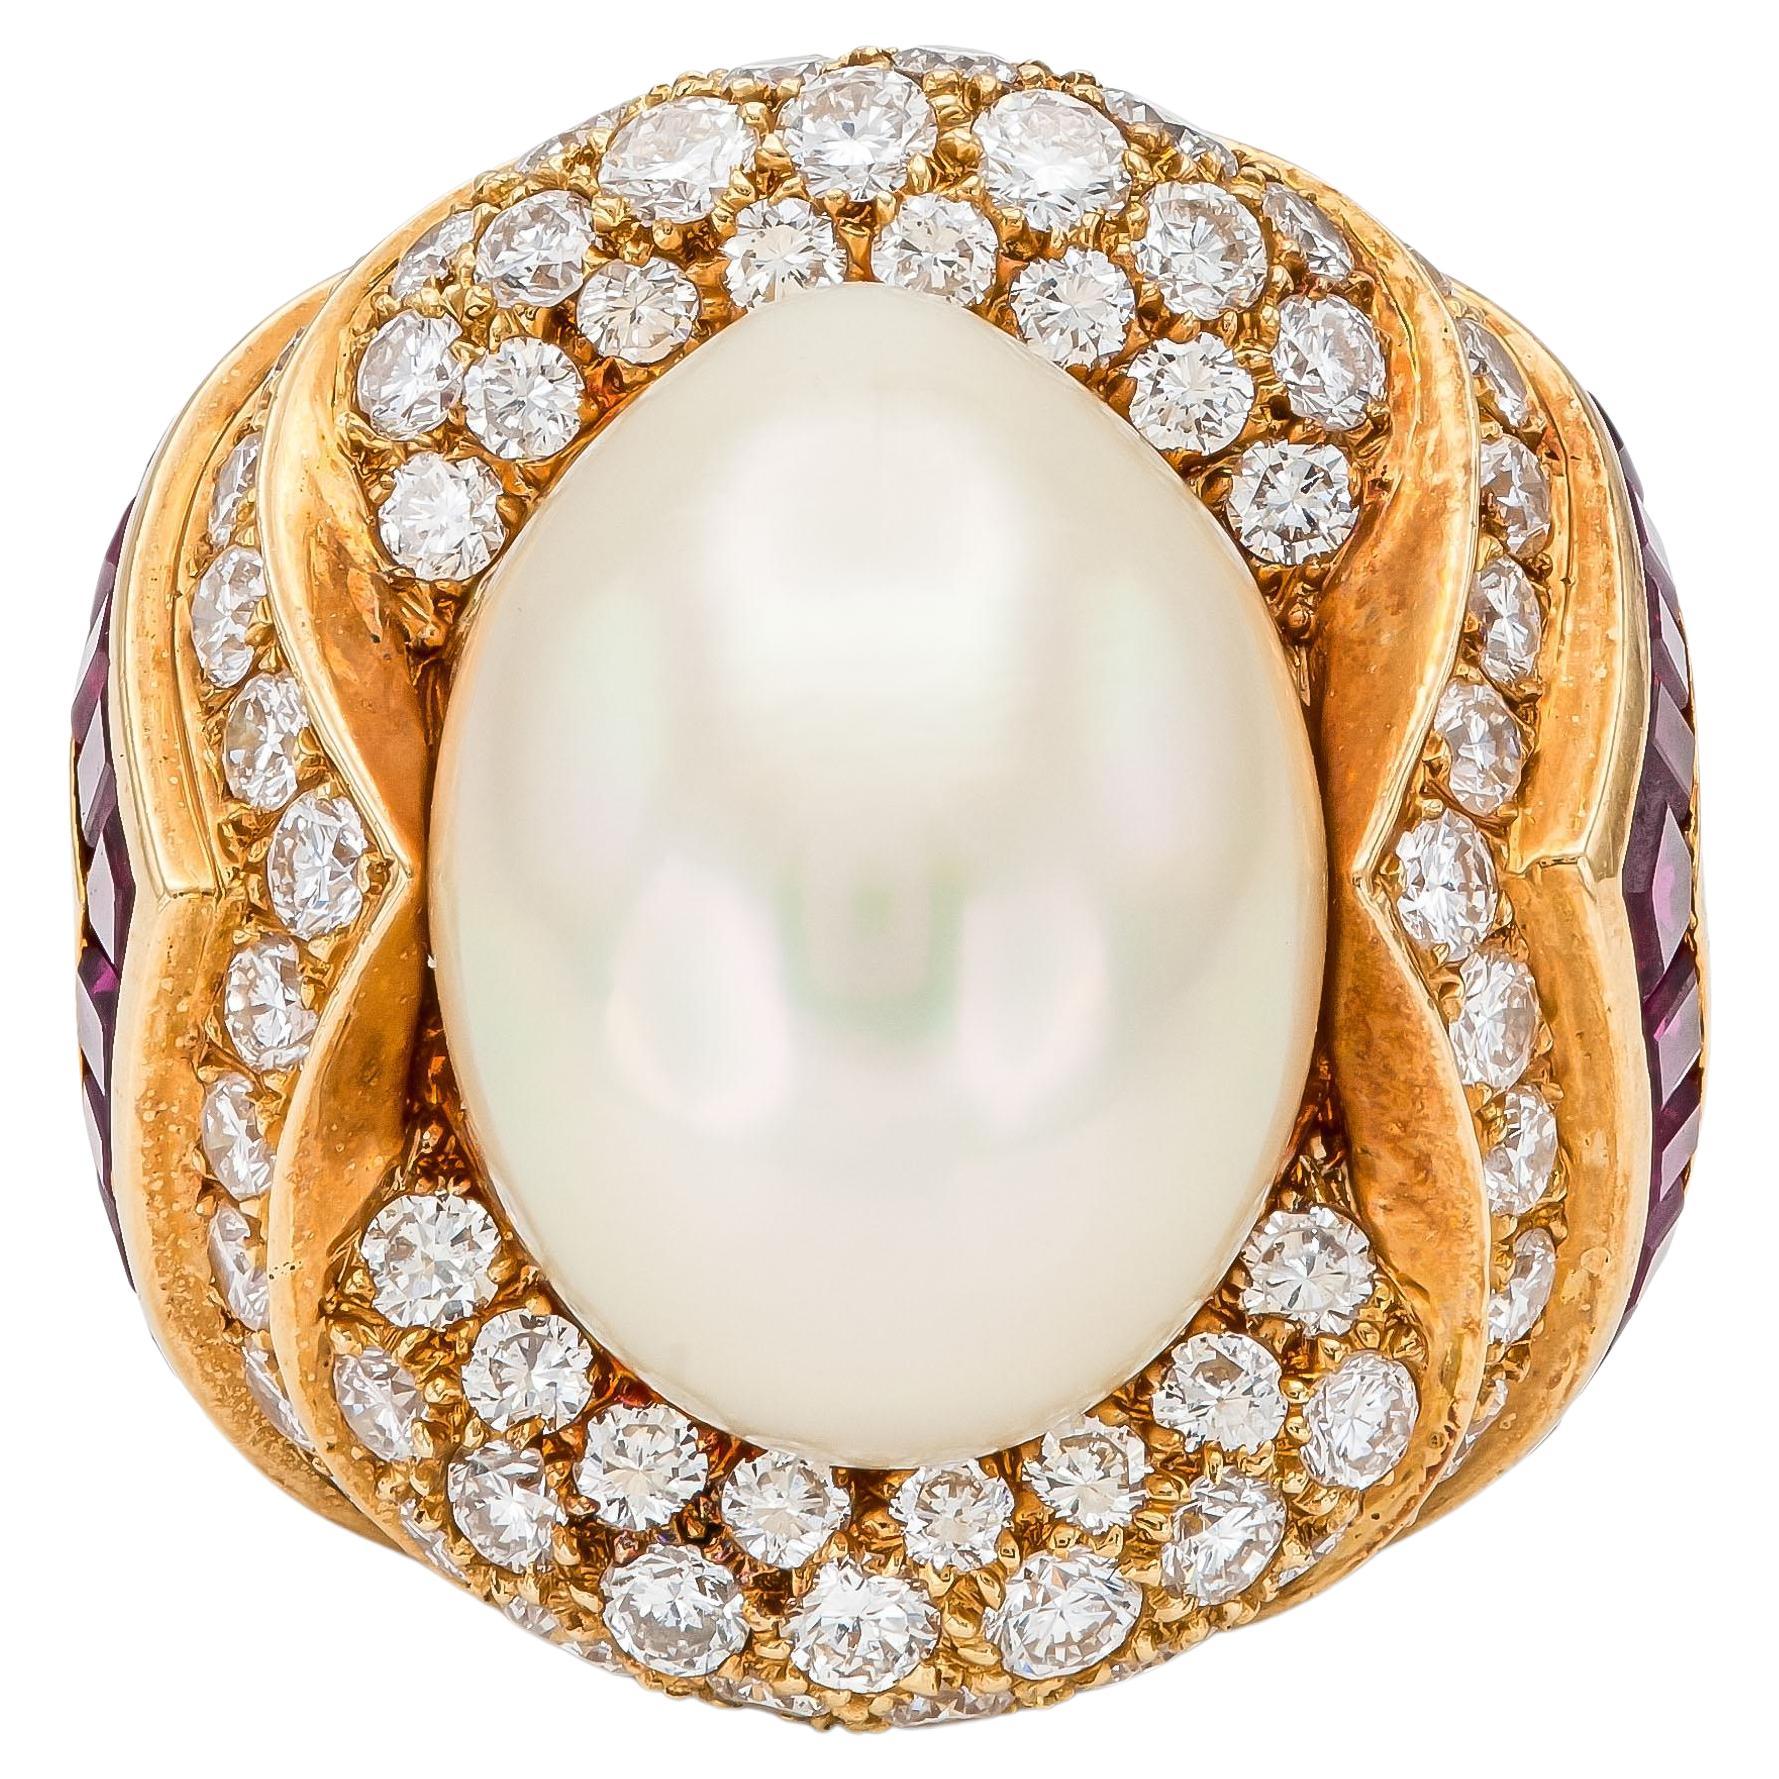 Vintage 1980s Mauboussin South Sea Pearl and Diamond Ring with Rubies